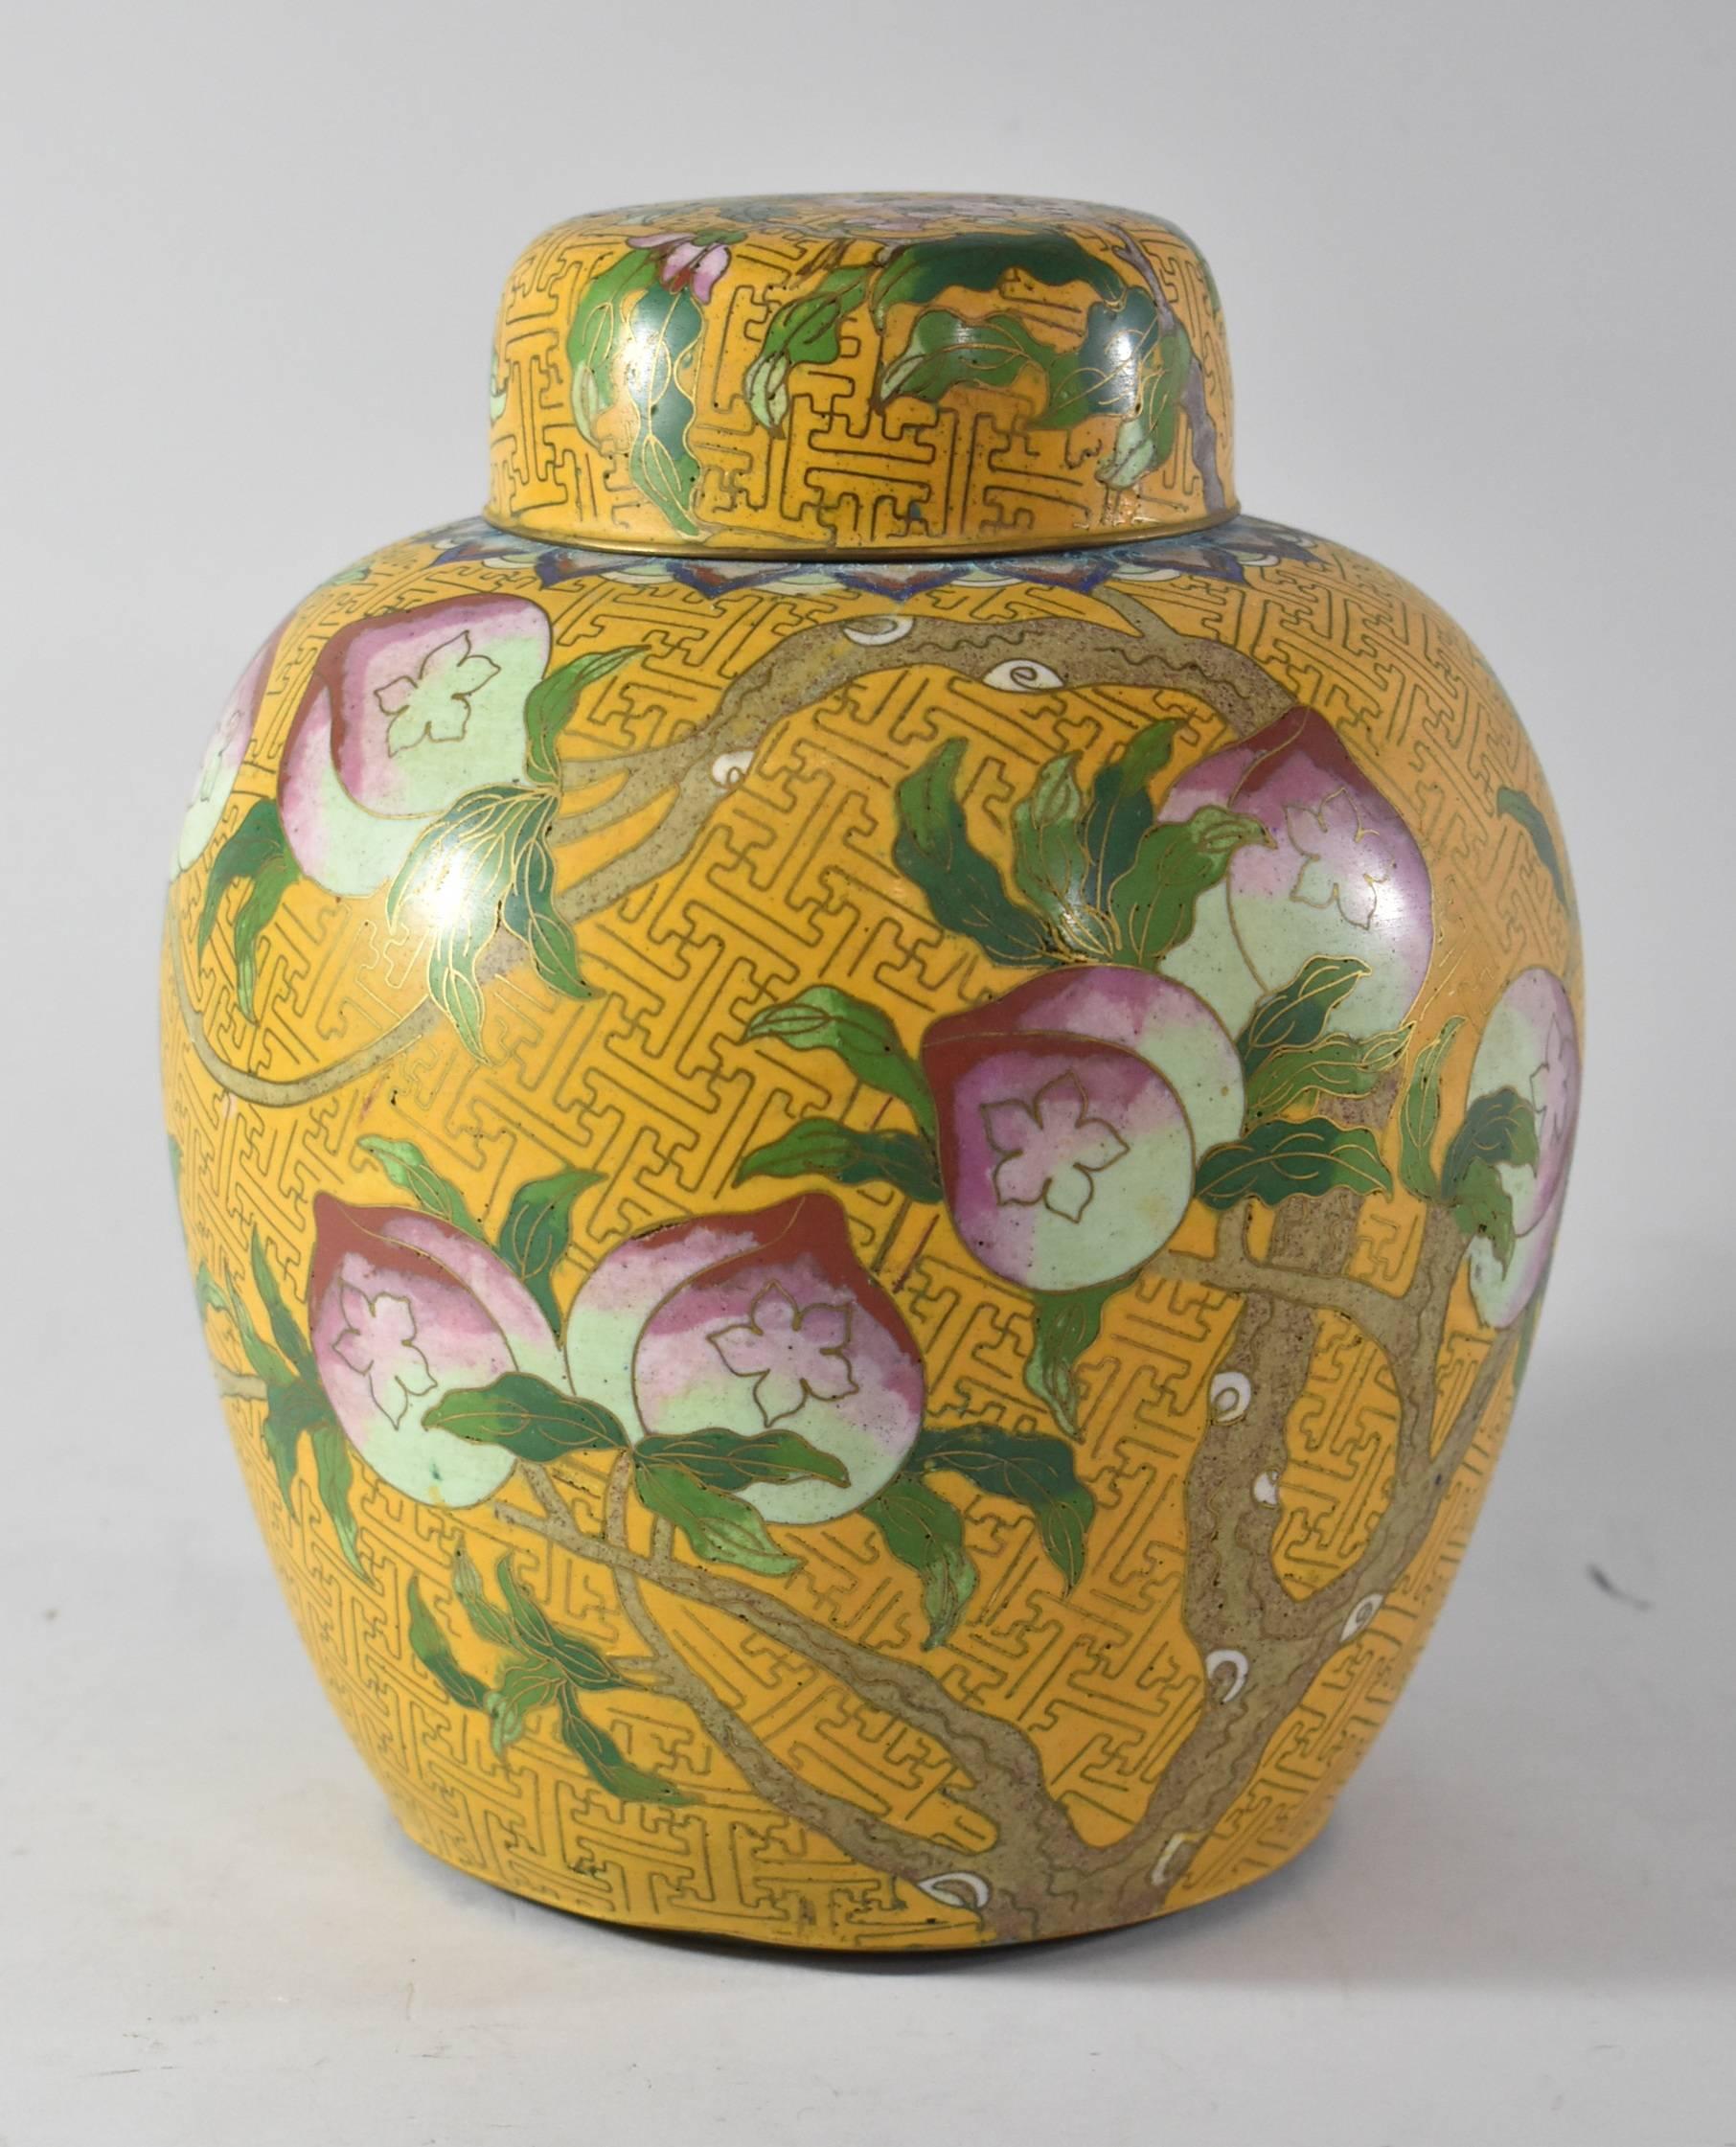 A beautiful pair of large cloisonne ginger jars with lids. These are done in the Peach tree Pattern. Background is yellow; tree branches with peaches are depicted along with some brightly colored flying bats. The interior of the jars and tops are